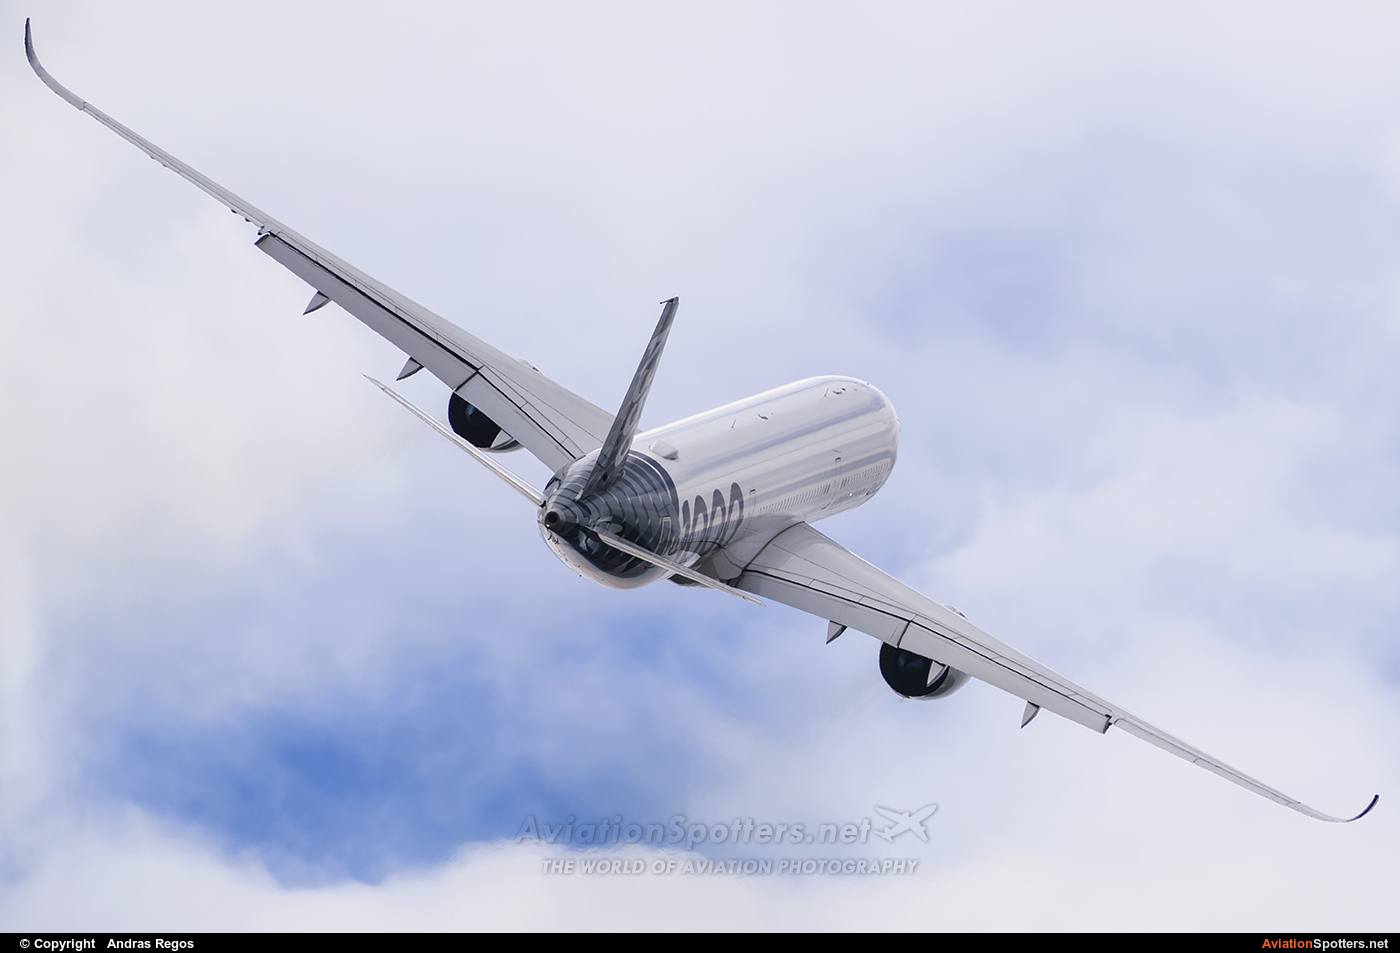 Airbus Industrie  -  A350-900  (F-WLXV) By Andras Regos (regos)